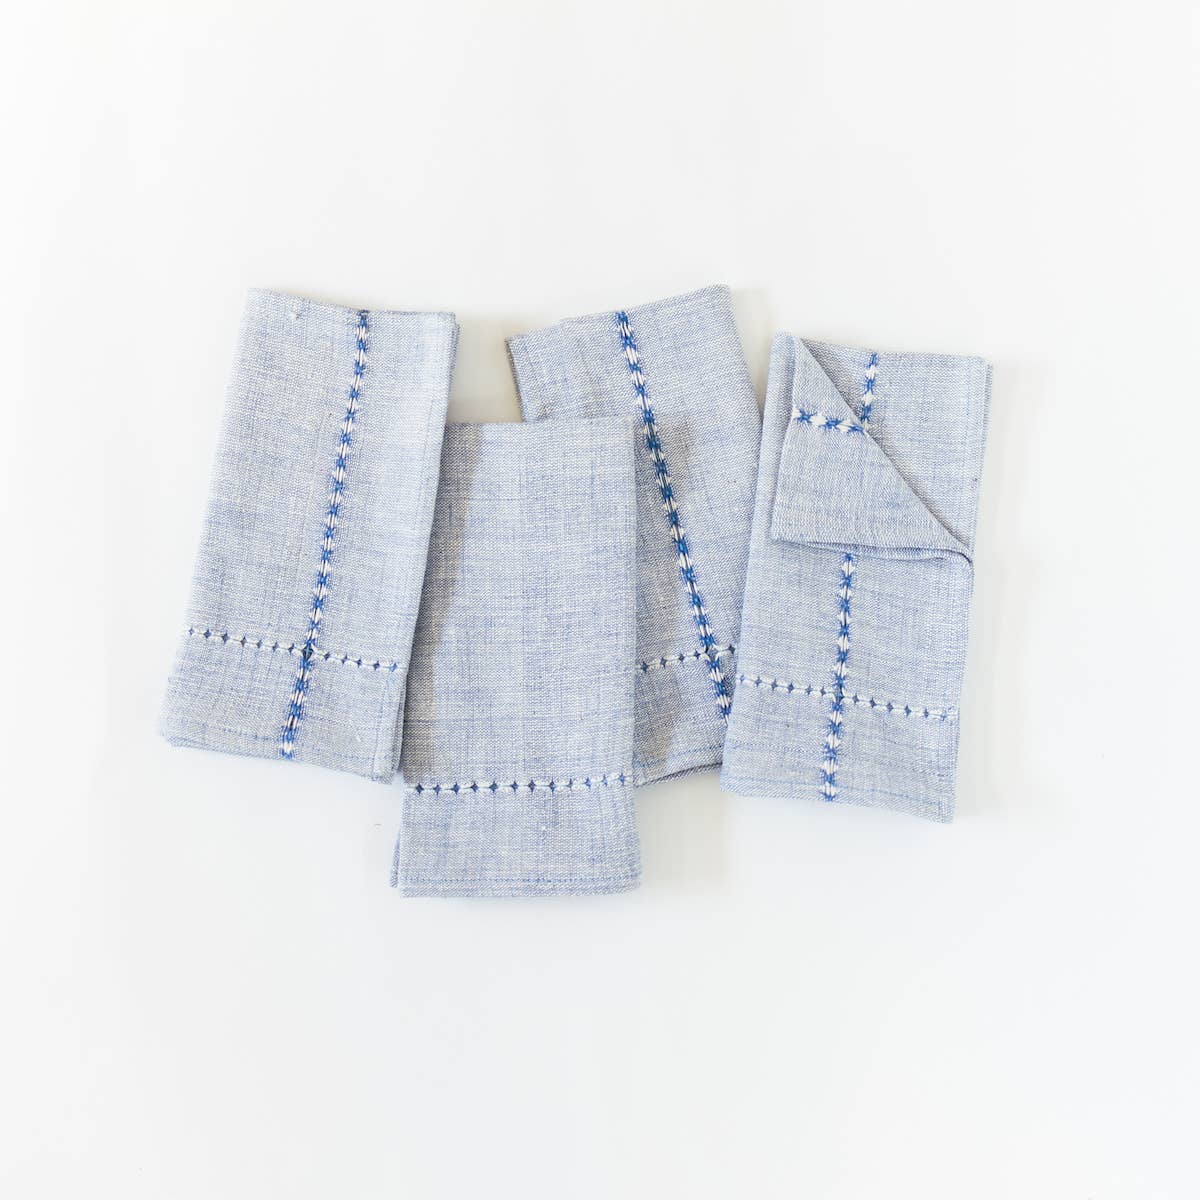 Pulled Cotton Napkin - Set of 4 - The Crowd Went Wild